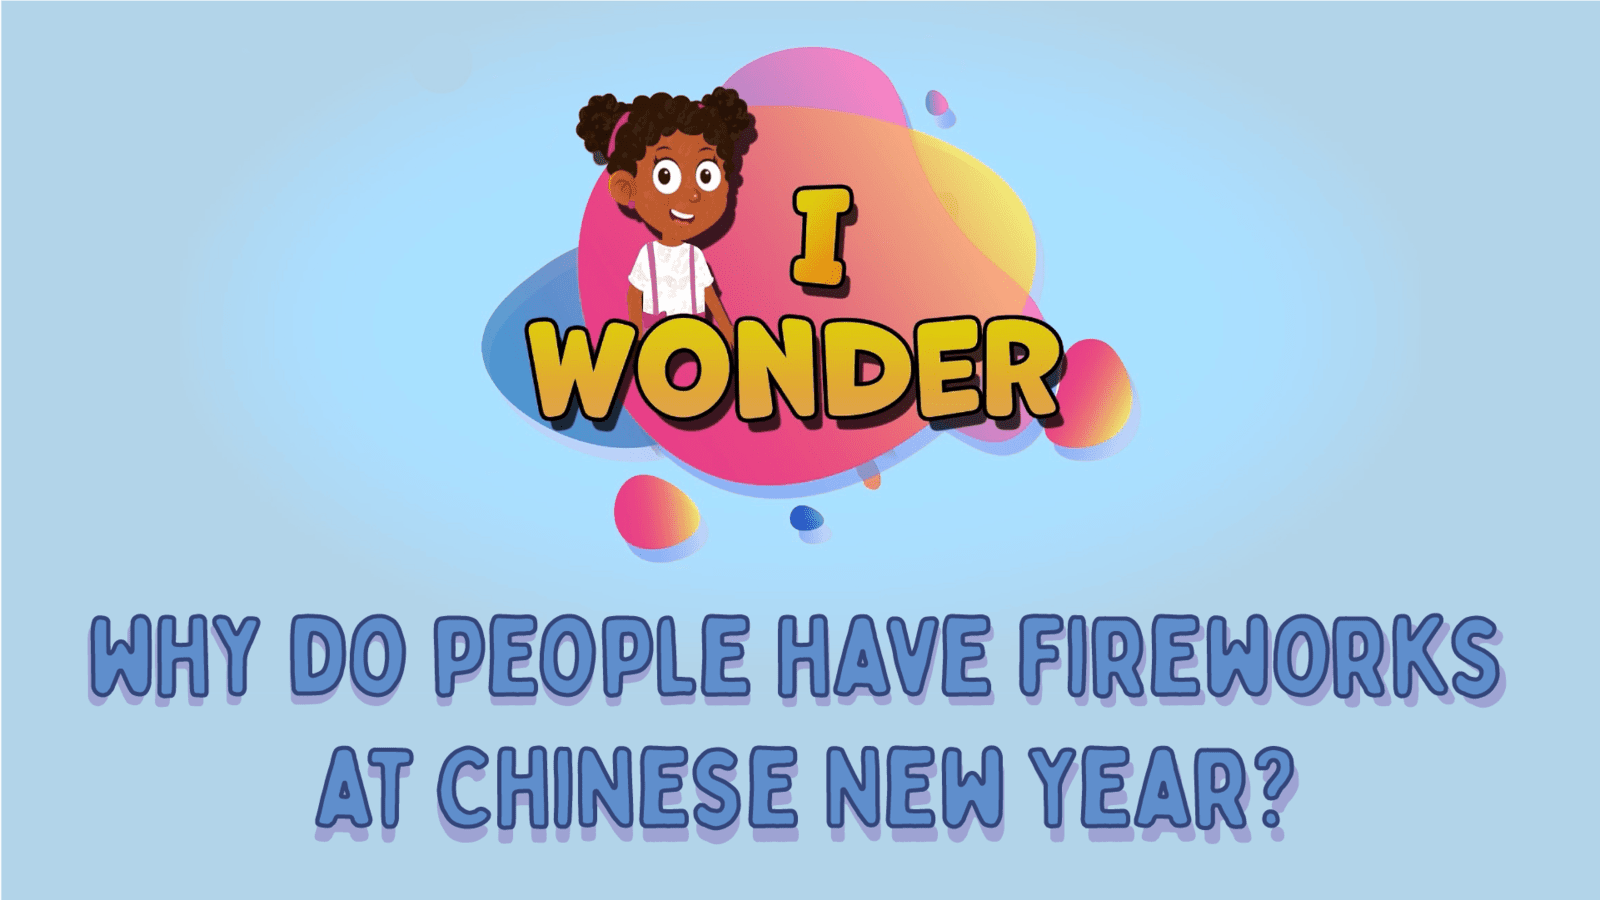 Why Do People Have Fireworks At Chinese New Year?